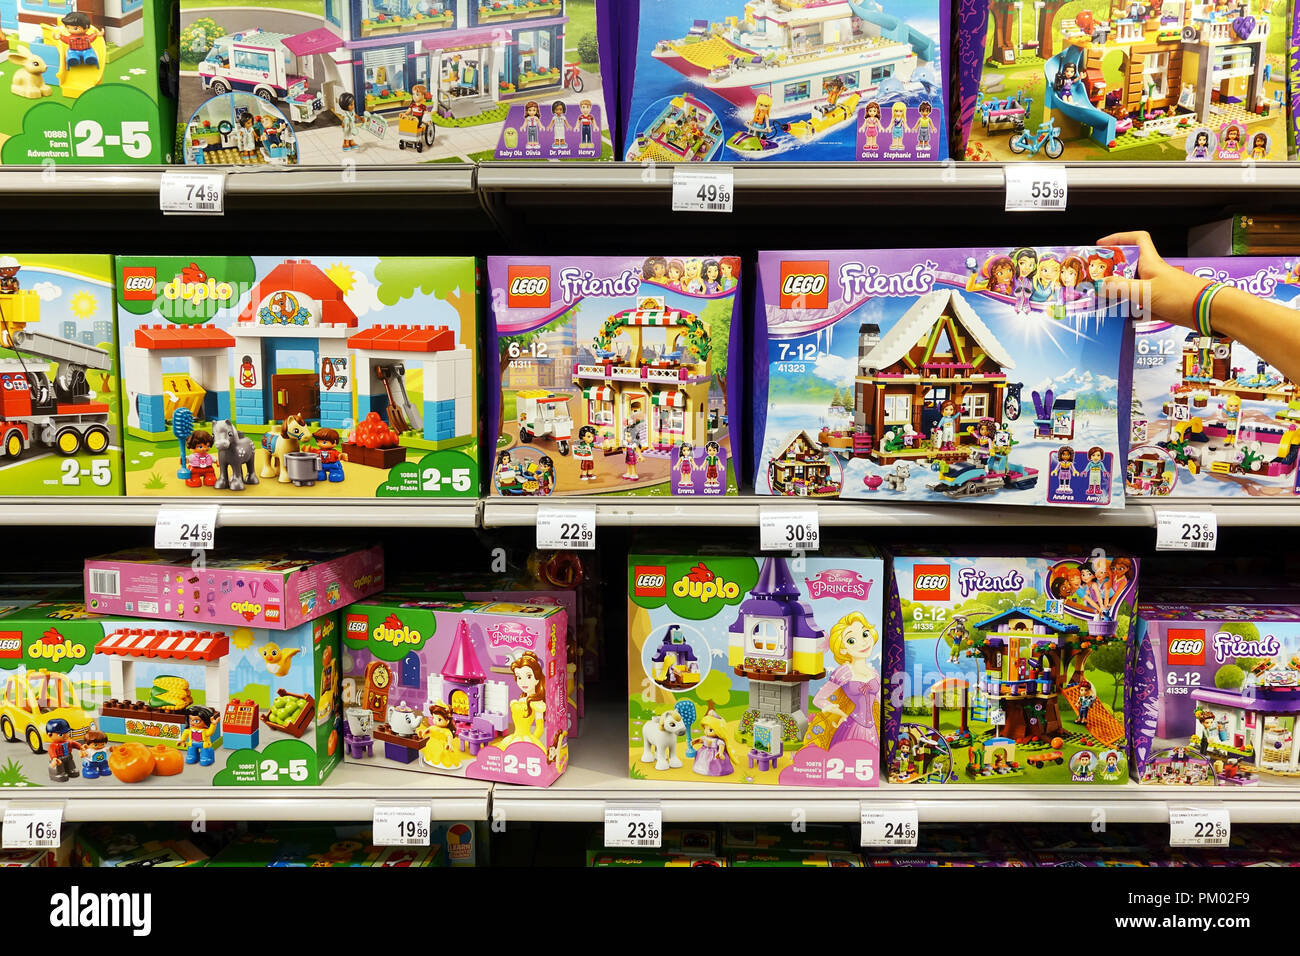 Lego toys in a store Stock Photo - Alamy